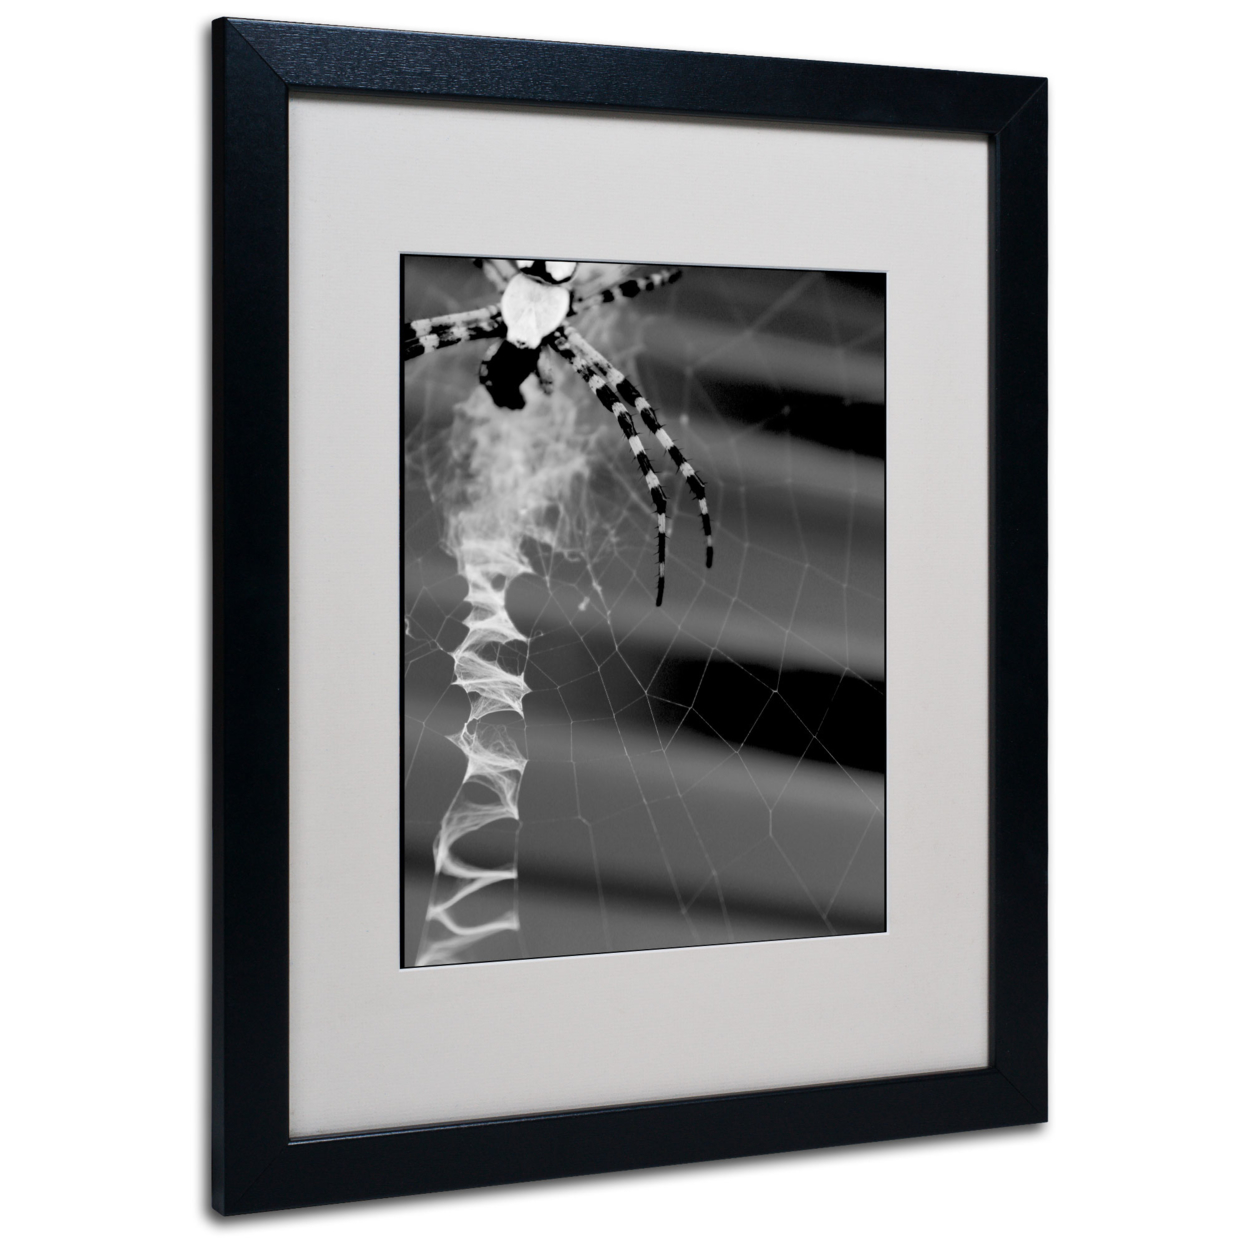 Patty Tuggle 'Black & White Spider & Web' Black Wooden Framed Art 18 X 22 Inches